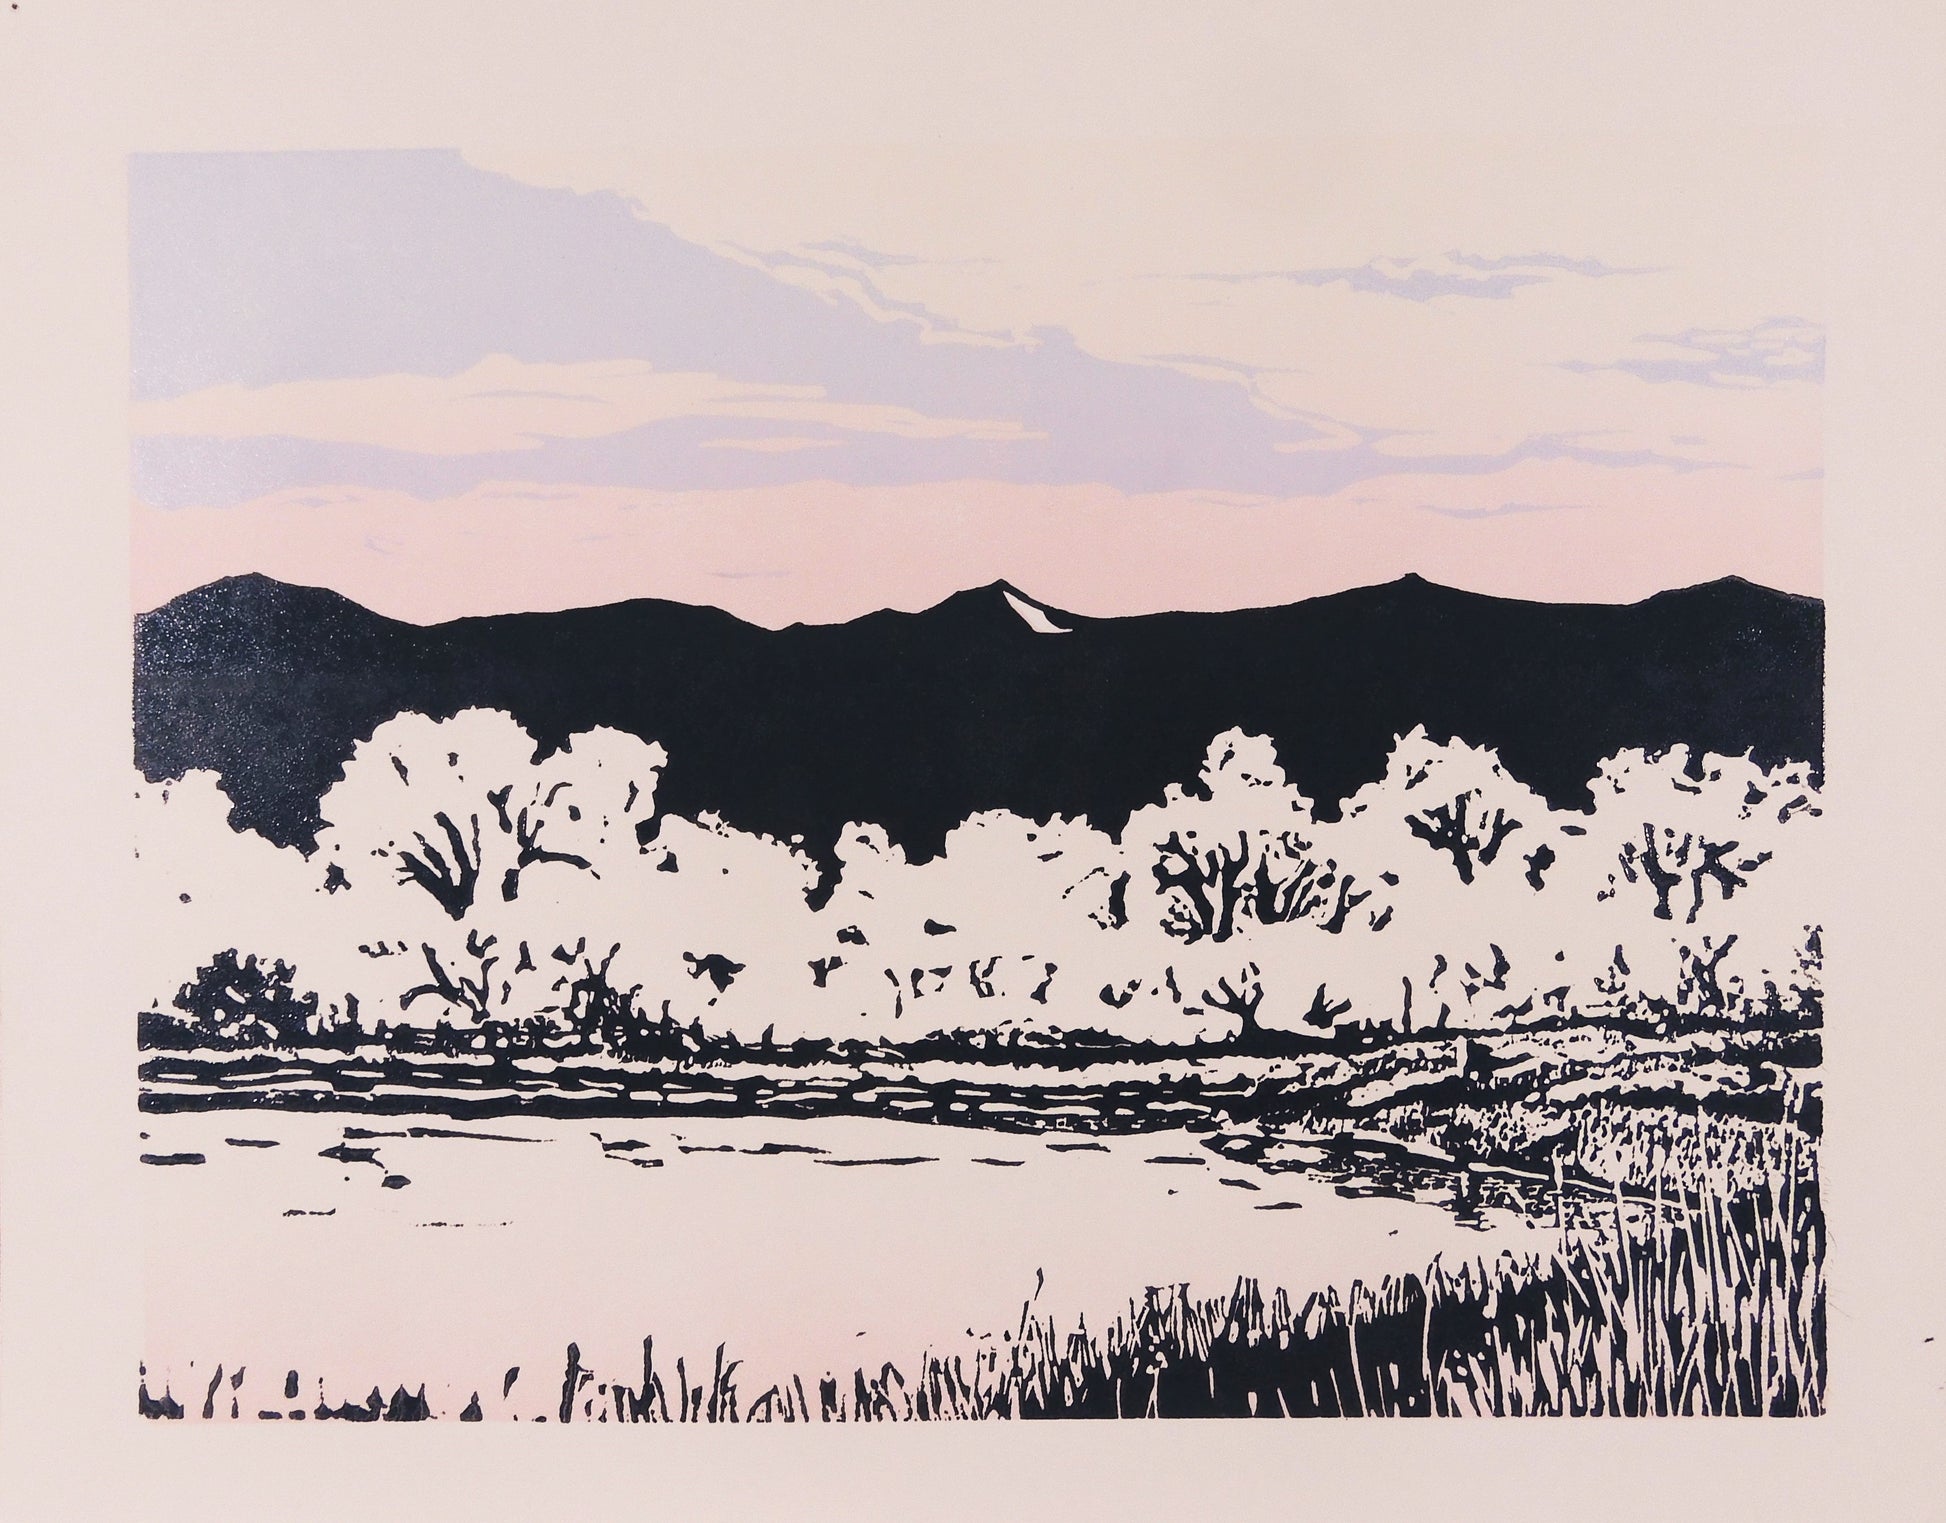 Cold Morning " Matted Original Relief Print Artist: Ginnie Madsen Ivory White Mat A frozen view with a pink sky above the mountains 12" long x 9" high print only 18" long x 15" high x 1/16" as matted Ready for a frame Original Relief print # 1 of 7 From the Artist: "These works are created using a traditional relief block printing method. I carve my design into the block's surface, one block for each color or I may a subtractive method using a single block.